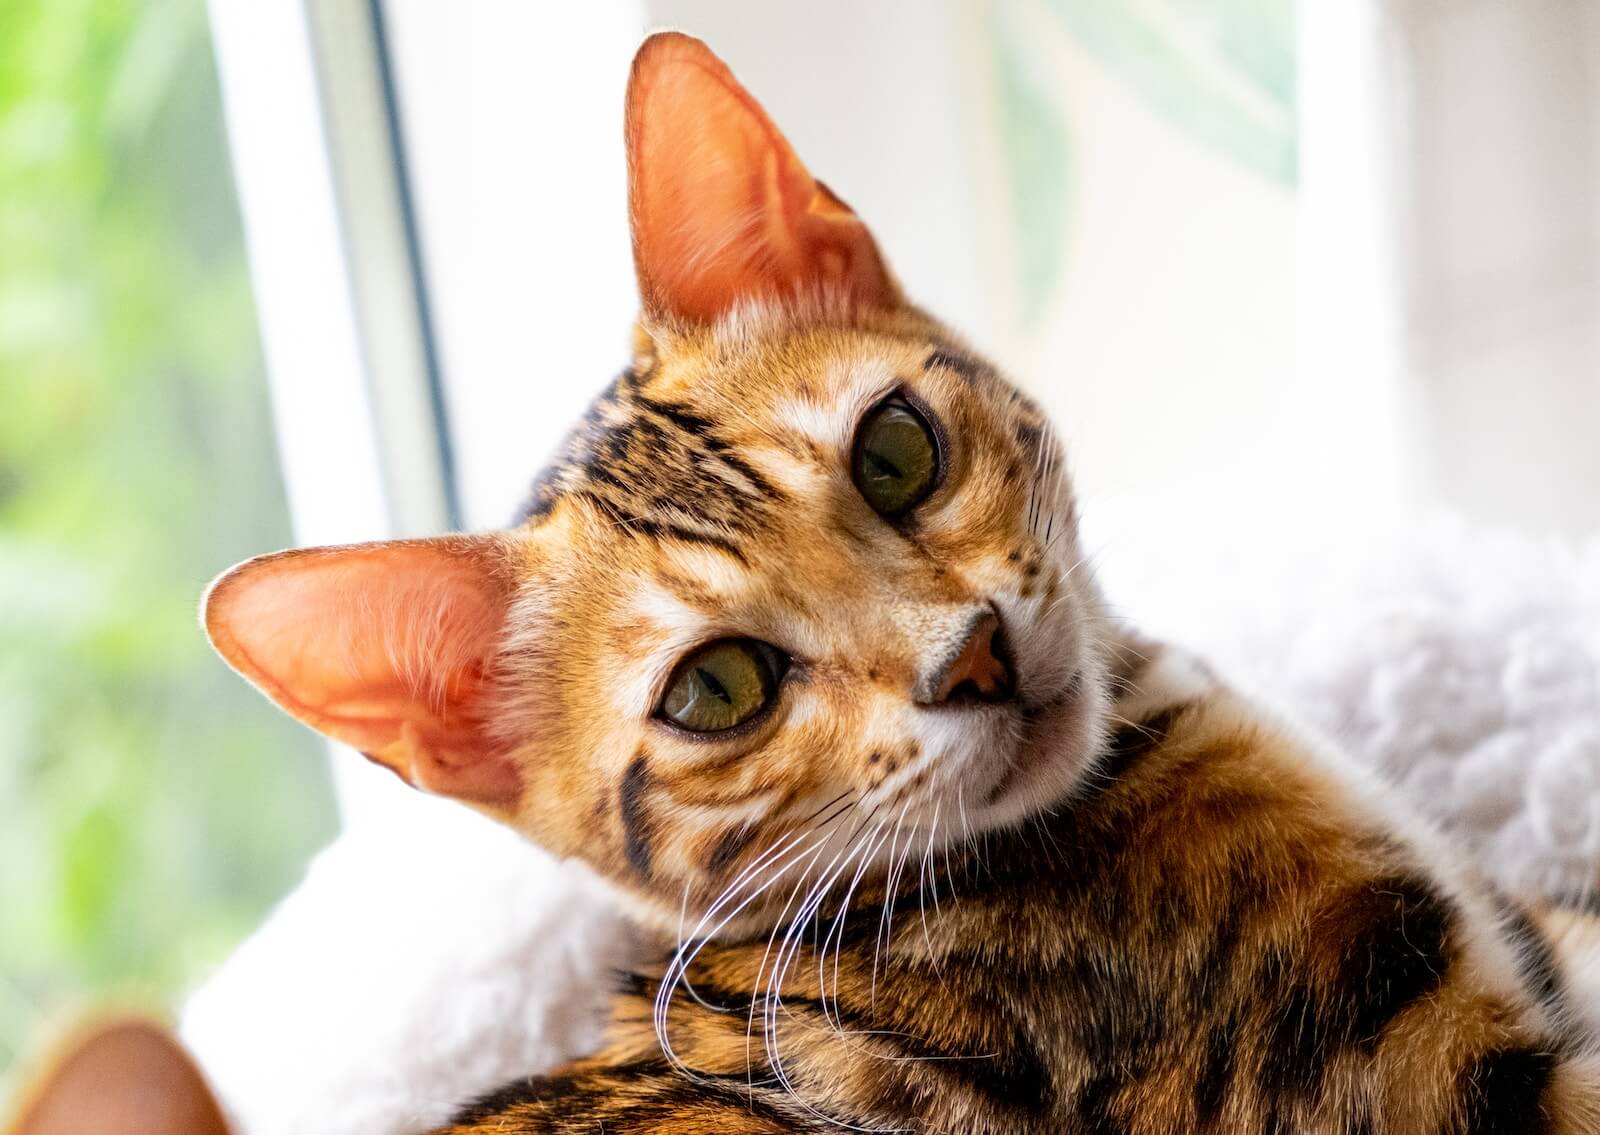 10 Cats That Look Like Tigers, Leopards, and Cheetahs - PetHelpful